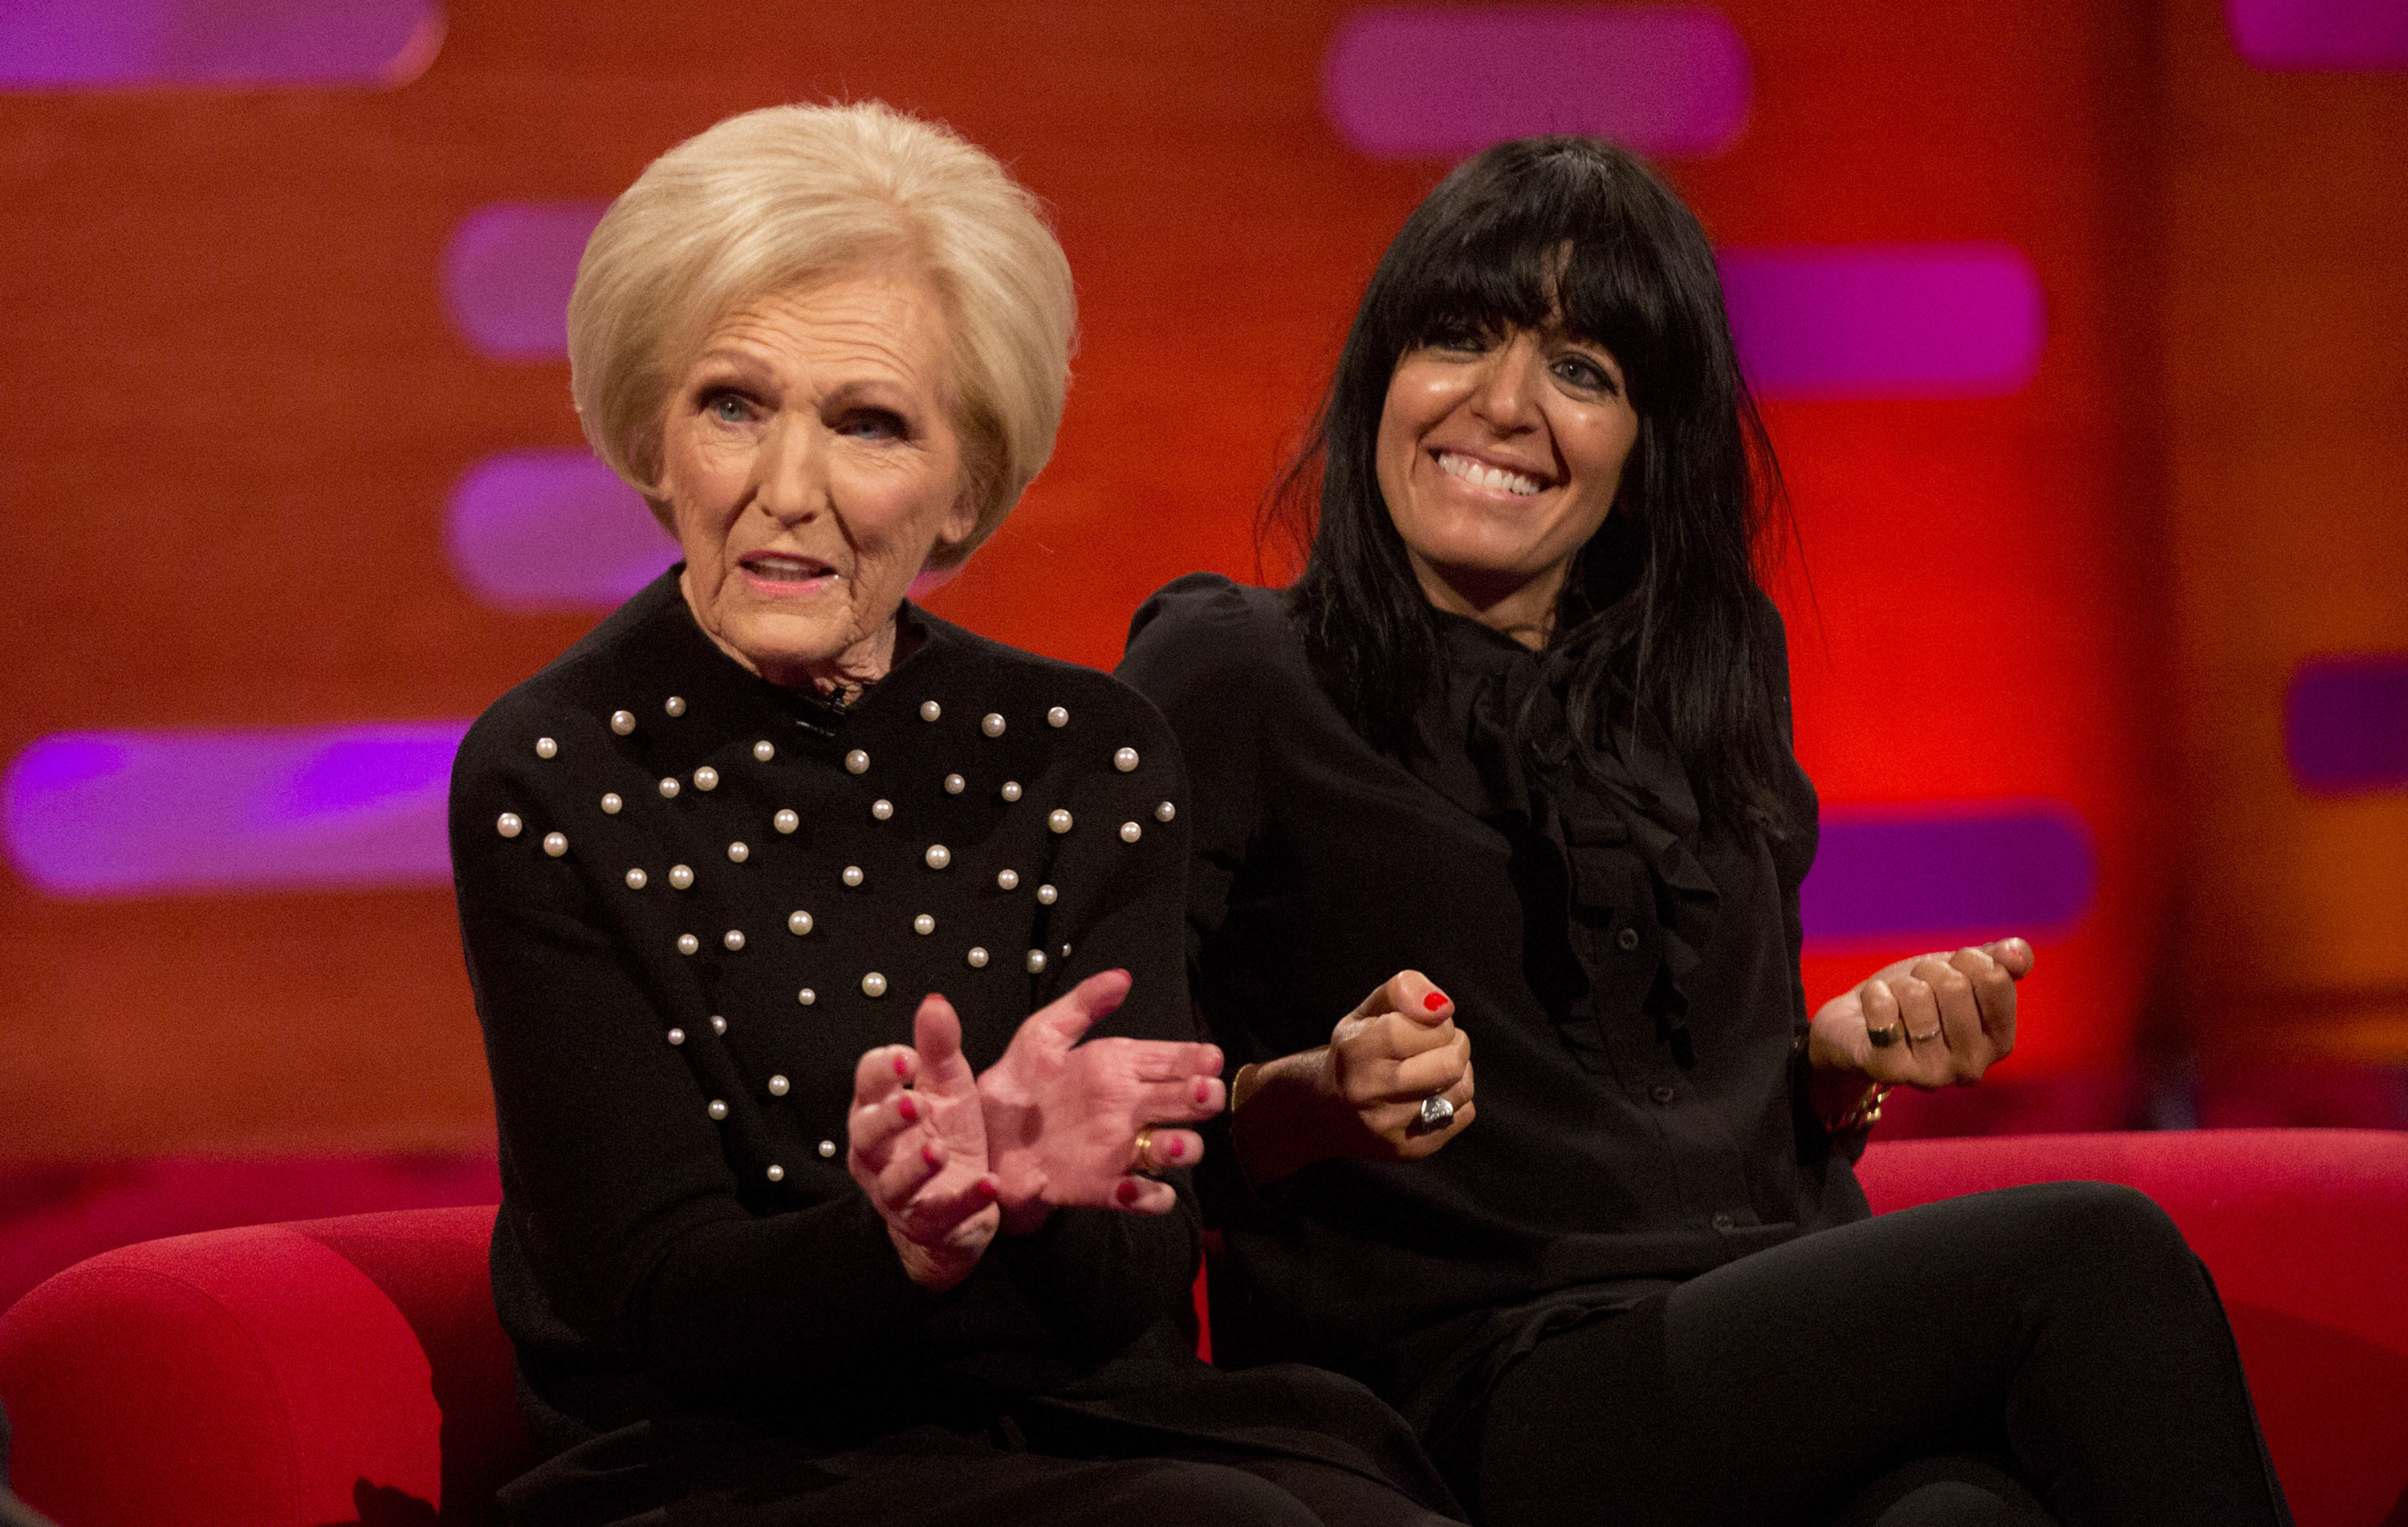 Mary Berry and Claudia Winkleman discuss their new cooking show (Isabel Infantes/PA)